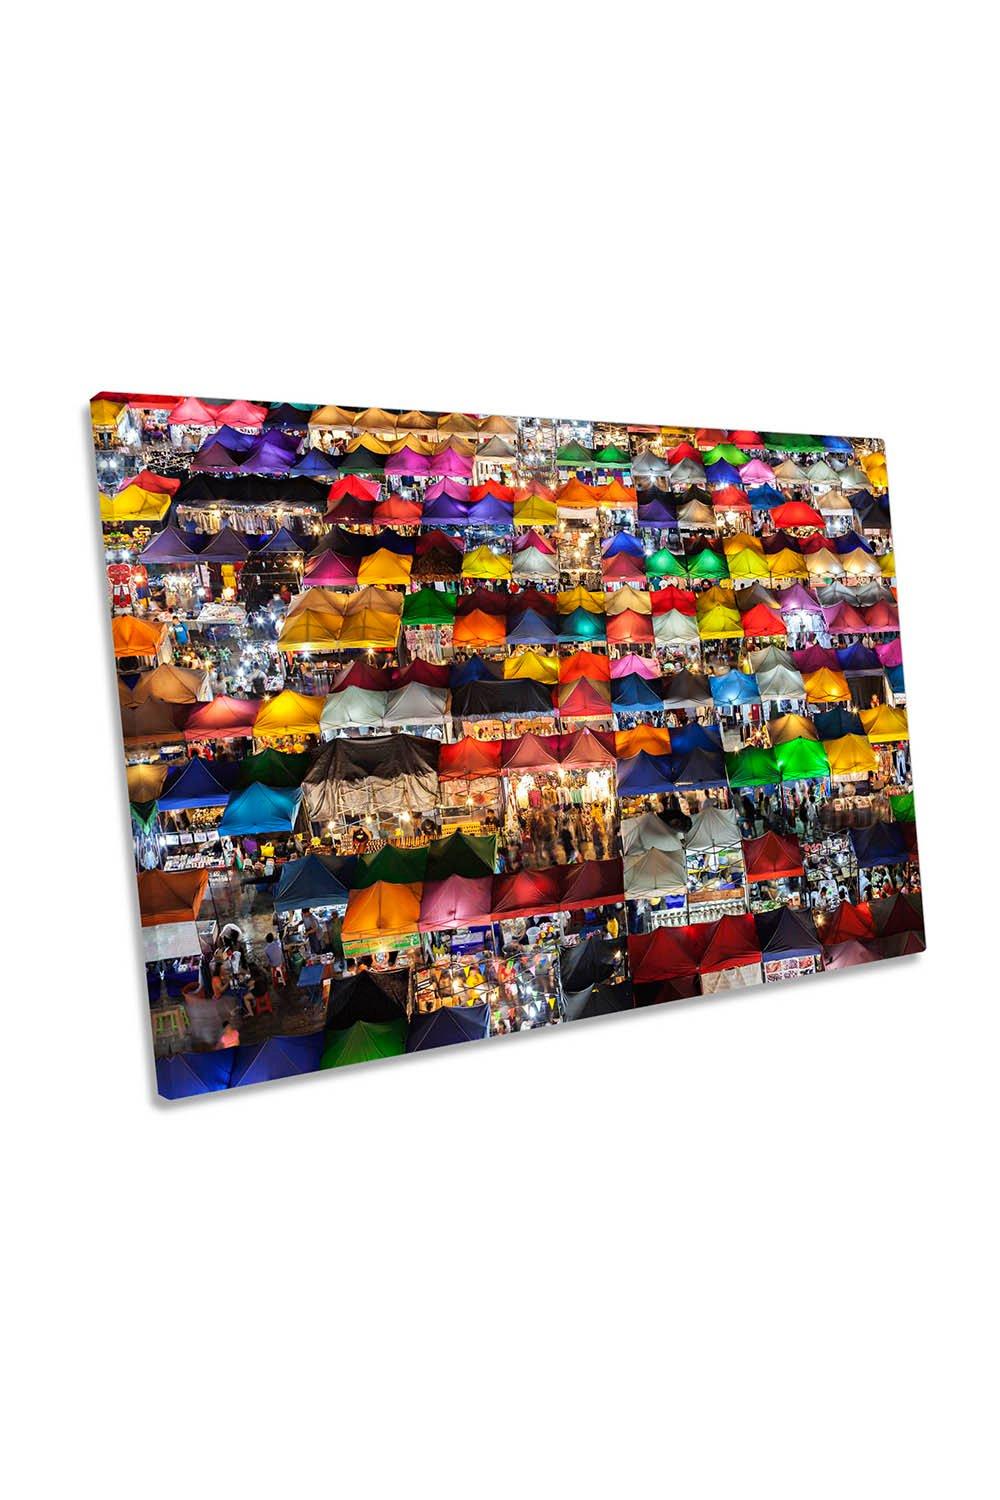 Colourful Street Market Urban Photography Canvas Wall Art Picture Print